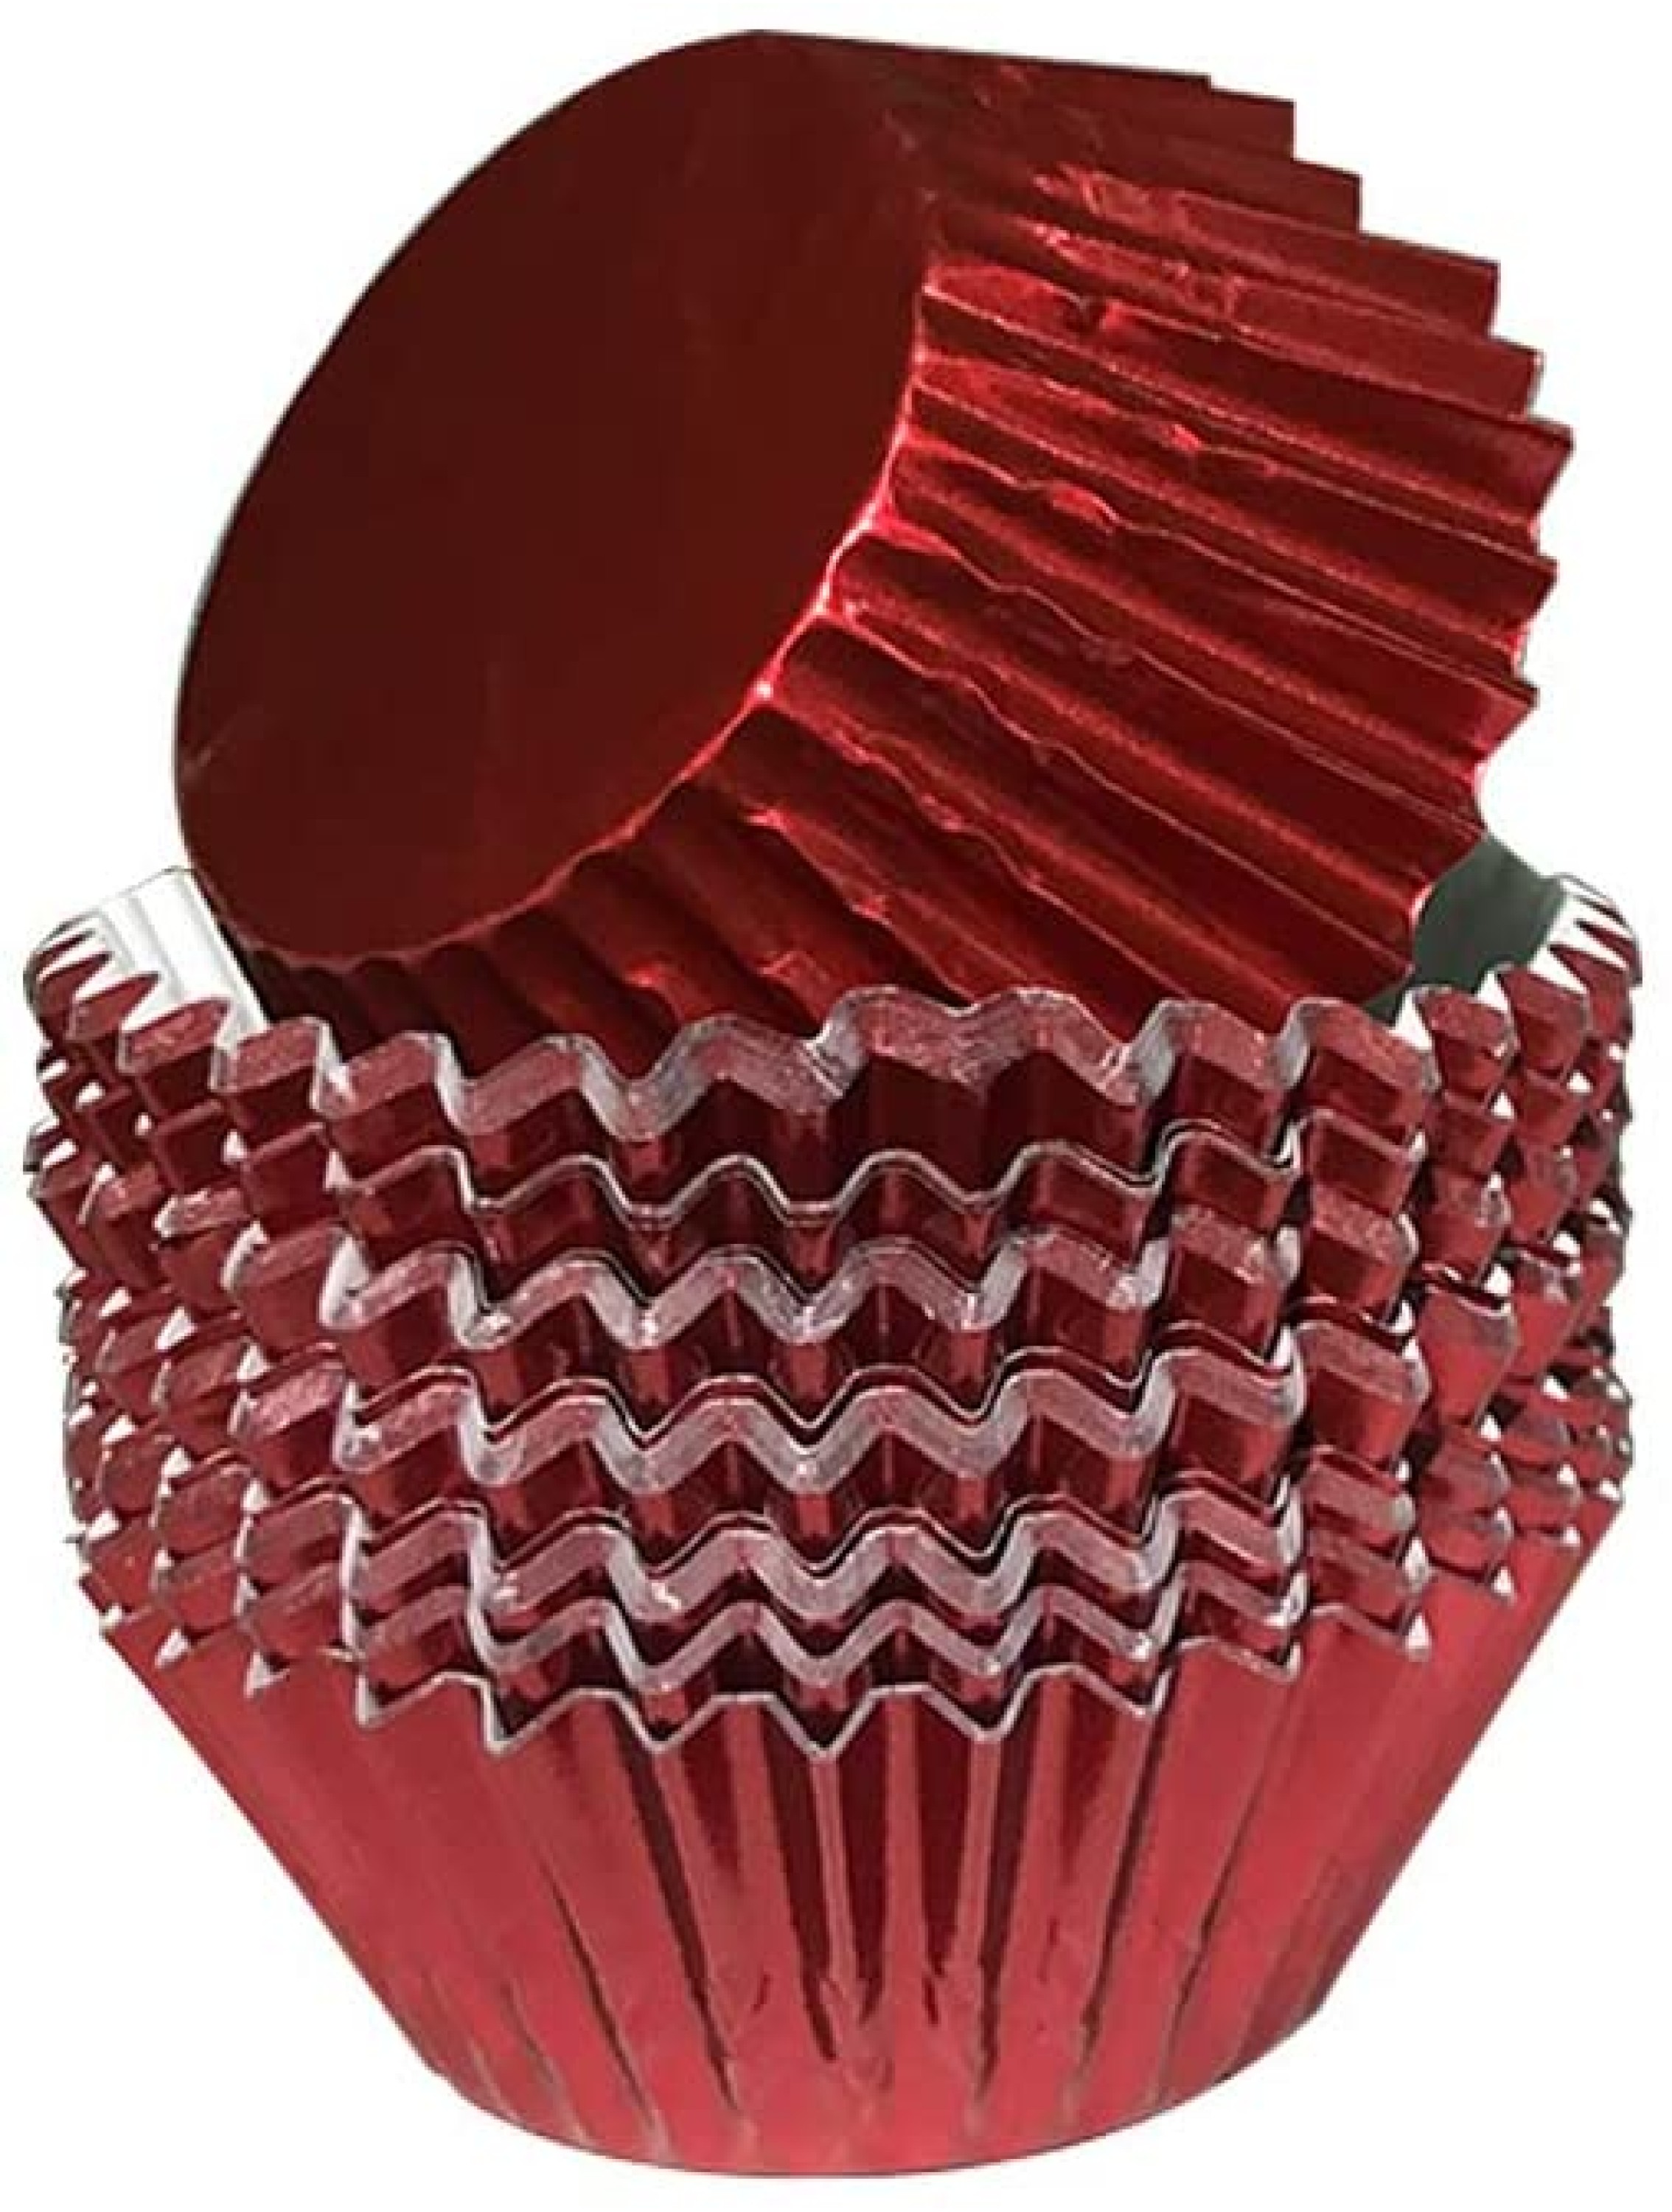 Pinwei 100 Pieces Standard Cupcake Cup Liners Foil Baking Cups Foil Cupcake Liners for Baking Muffin and Cupcakes Decoration Cups Red - B4H4Z2C2V